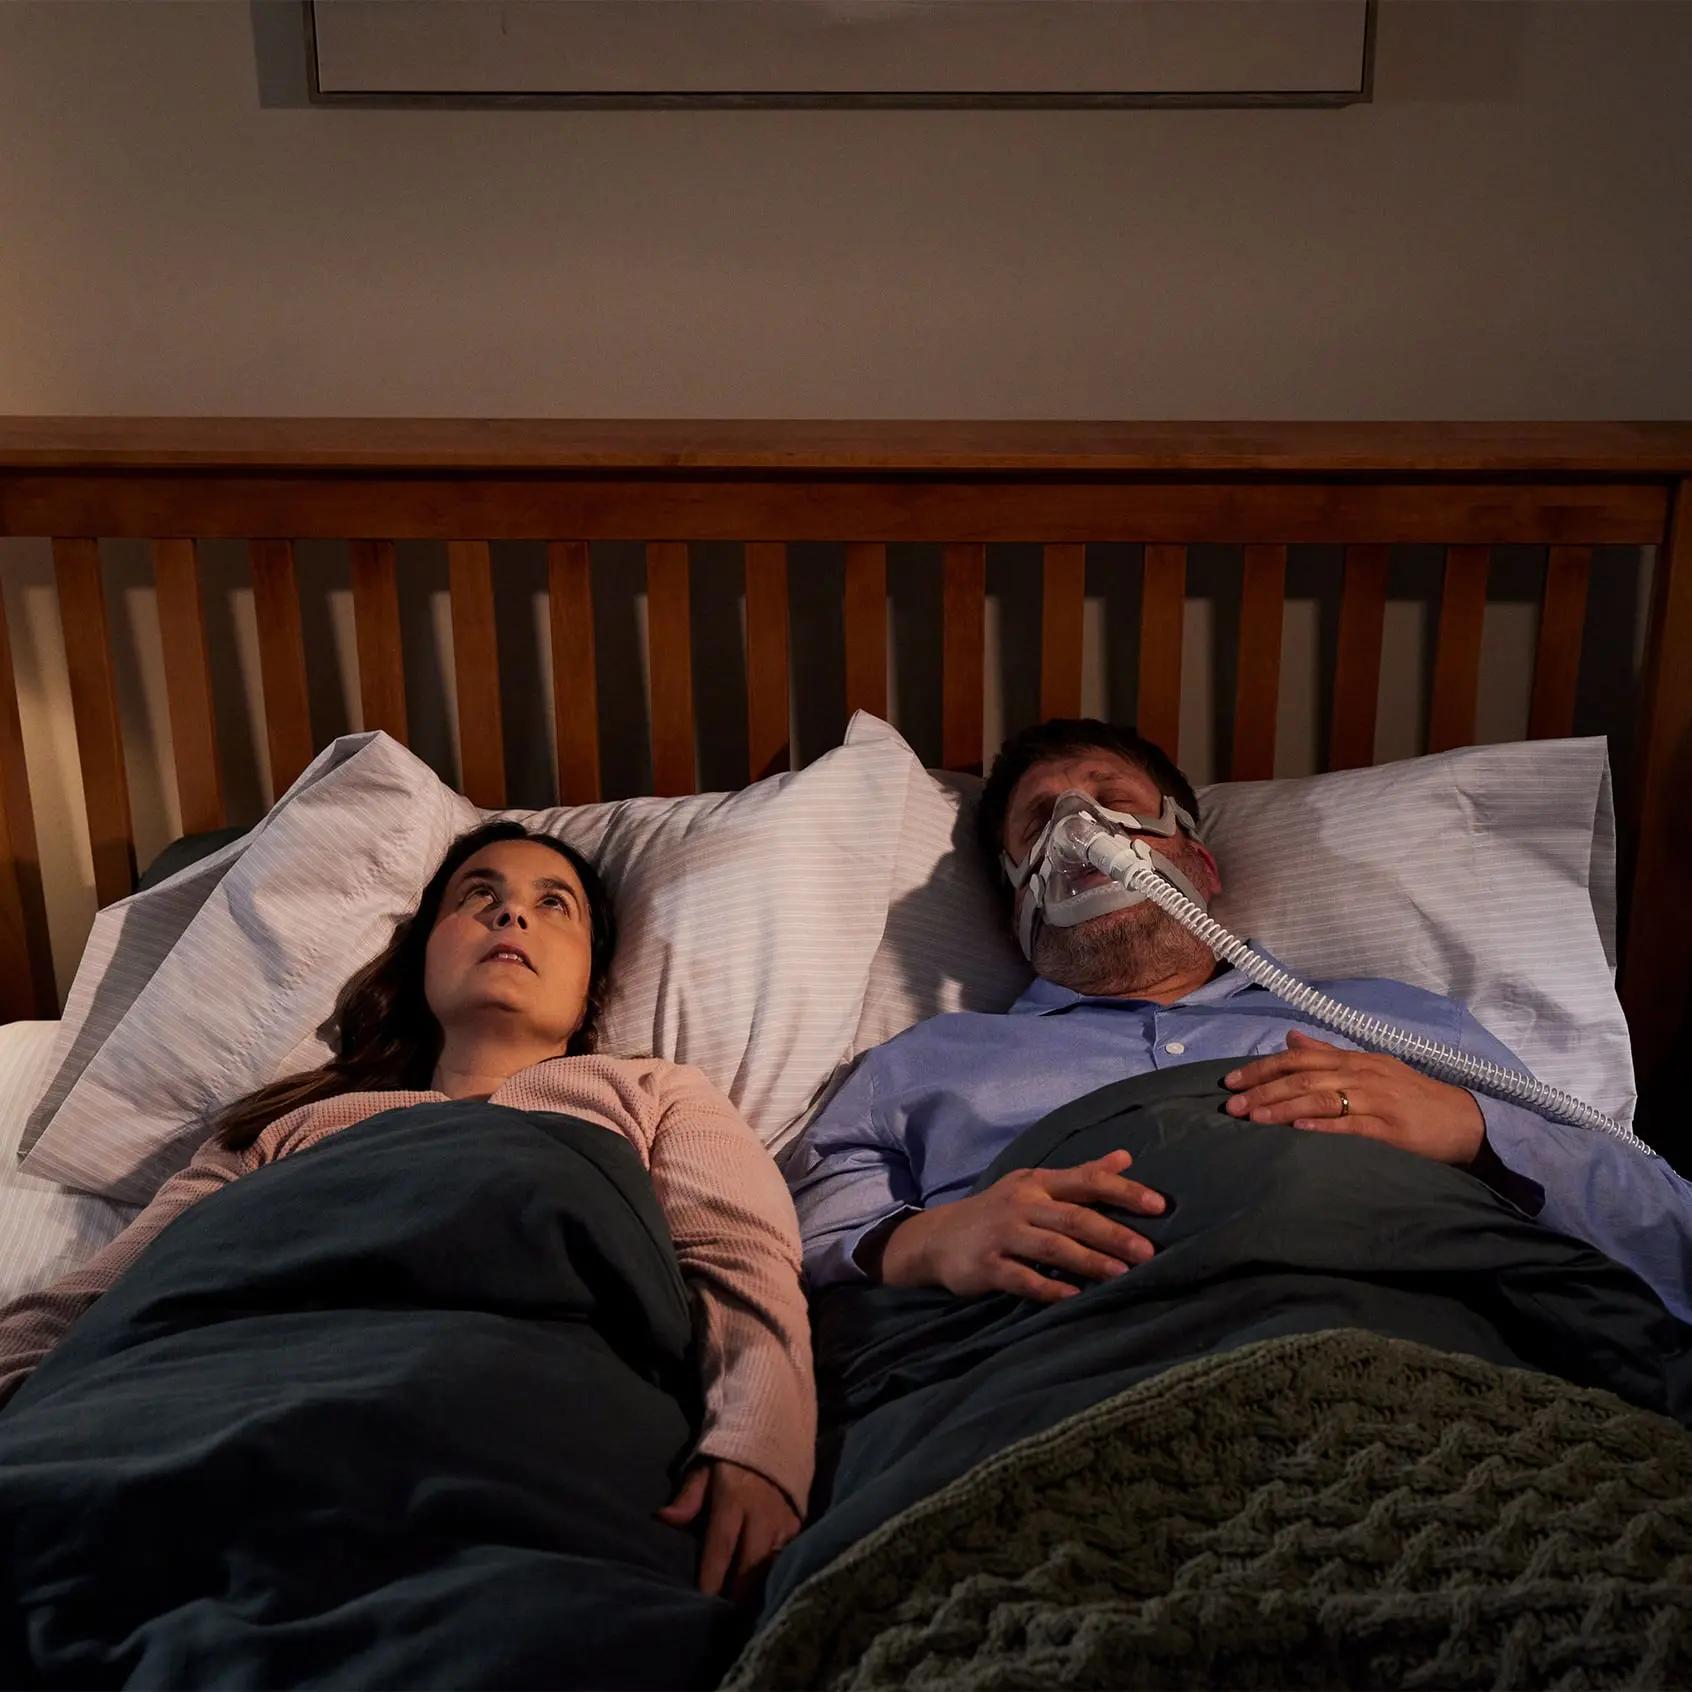 The image depicts a man and a woman lying side by side in bed. The man is wearing a CPAP mask, the woman looks frustrated.